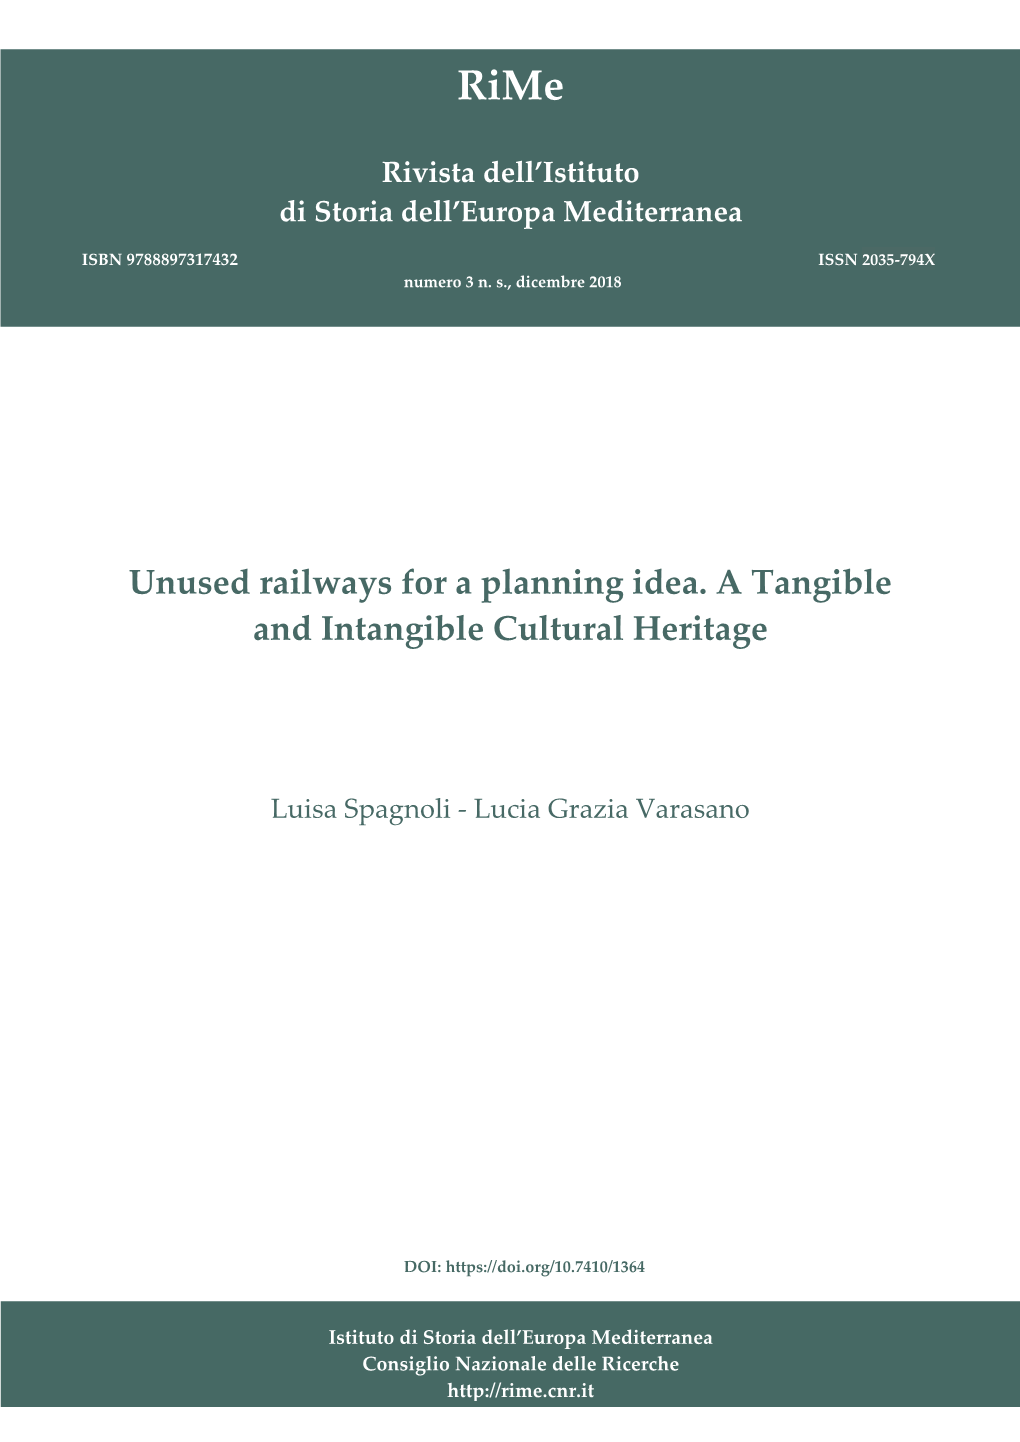 Unused Railways for a Planning Idea. a Tangible and Intangible Cultural Heritage